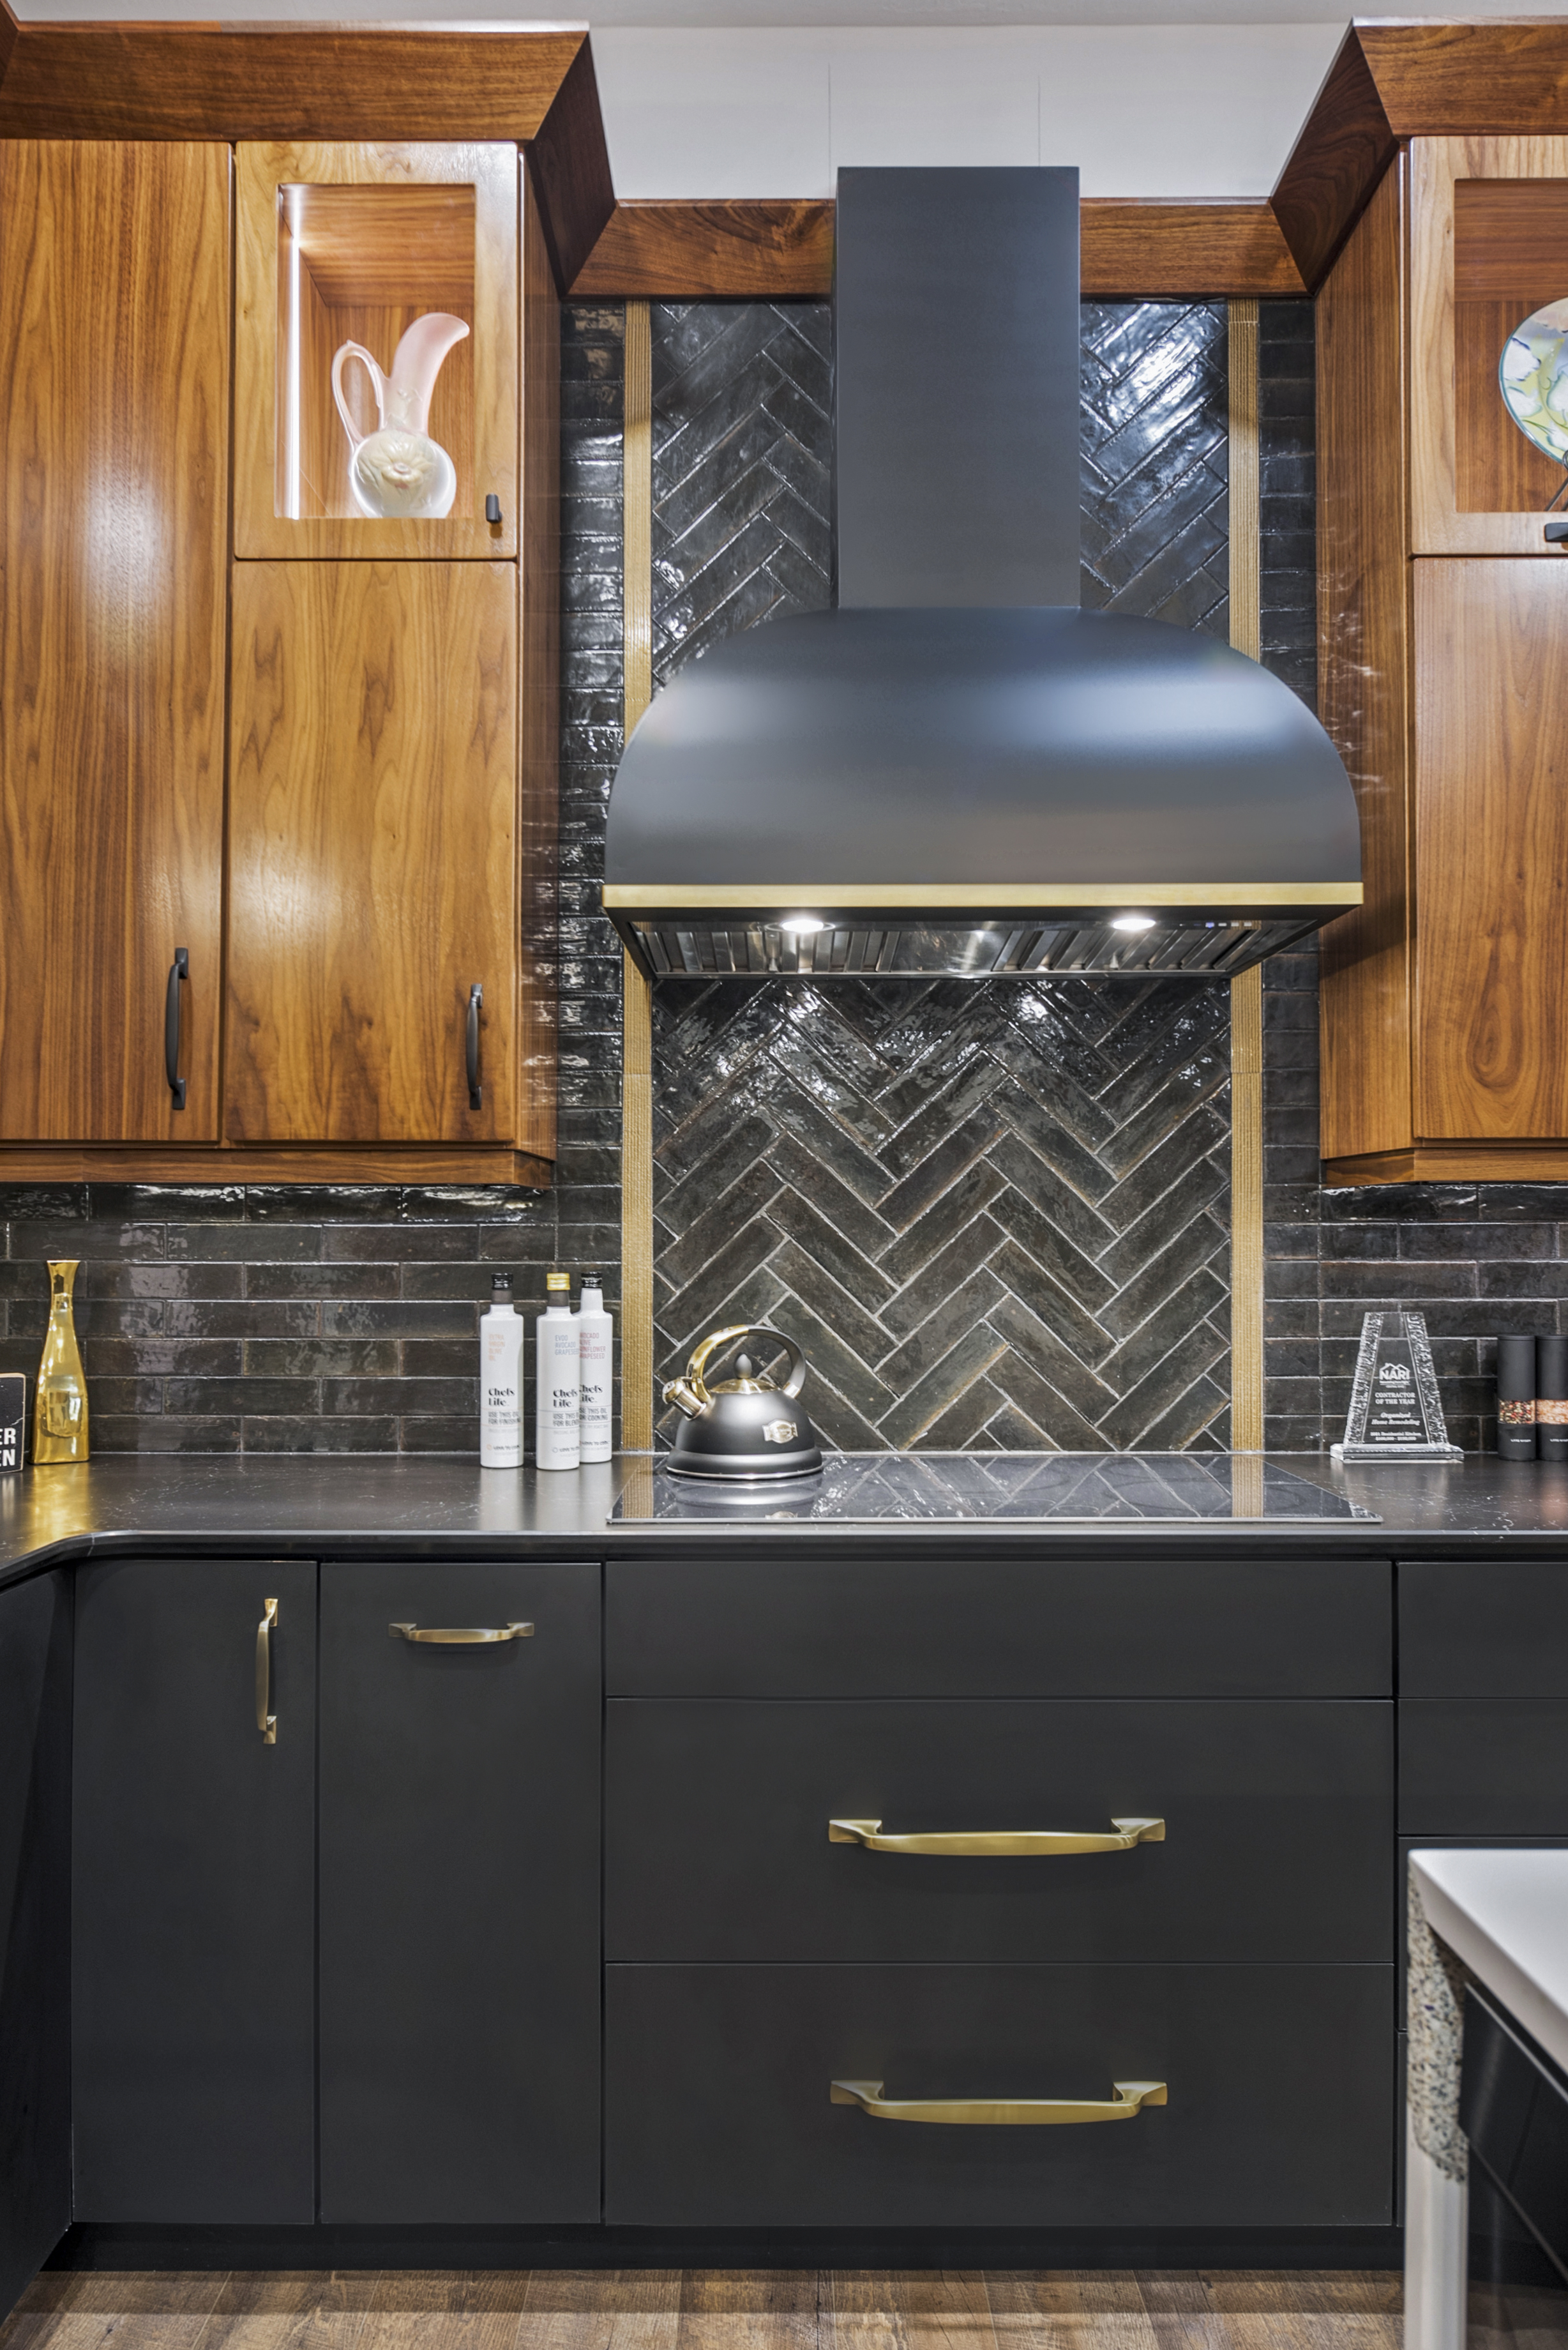 A classic kitchen planning with grey kitchen cabinets and quartz kitchen countertops enhanced by incorporating a stylish range hood